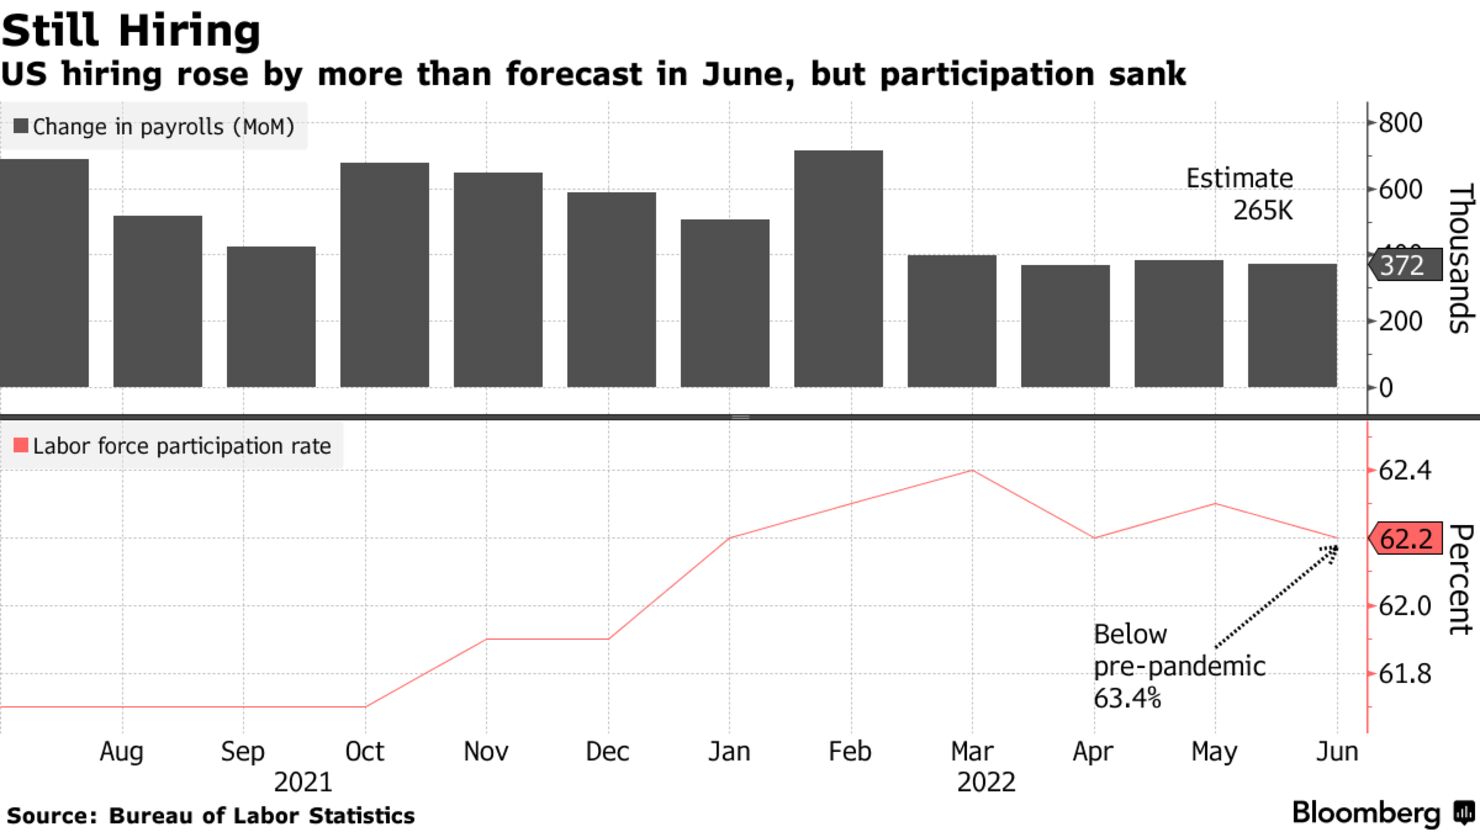 US hiring rose by more than forecast in June, but participation sank